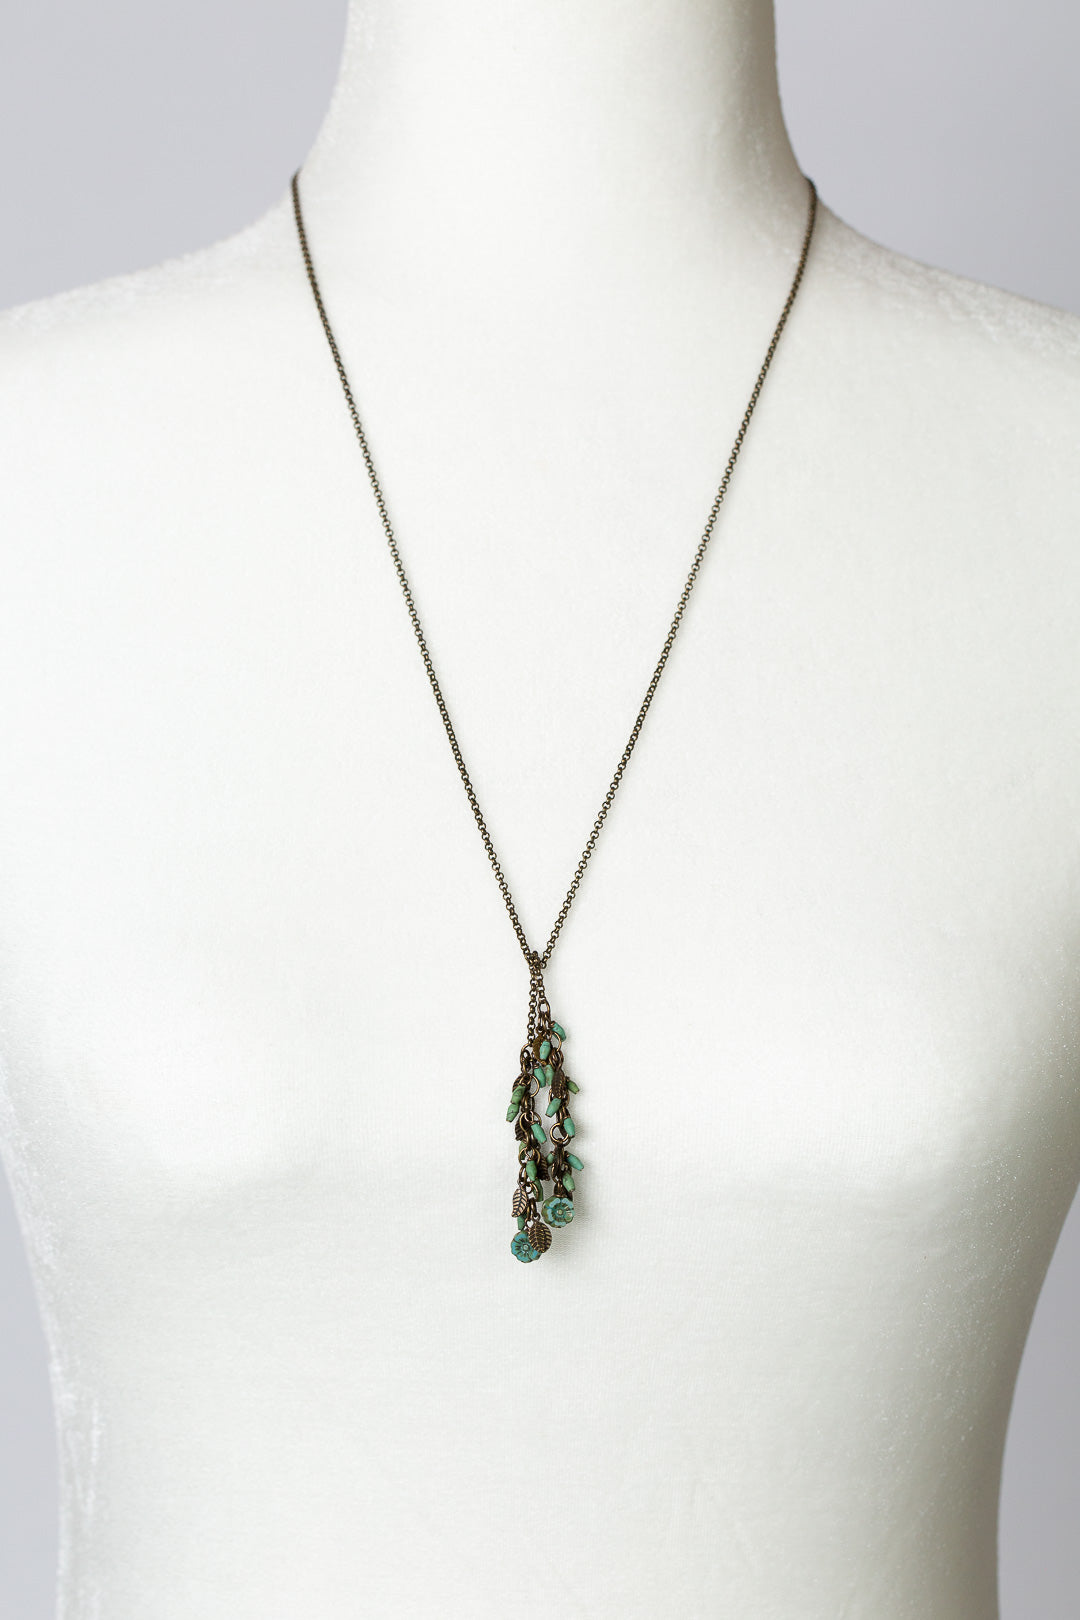 Rustic Creek 26.5" Turquoise With Czech Glass Lariat Necklace